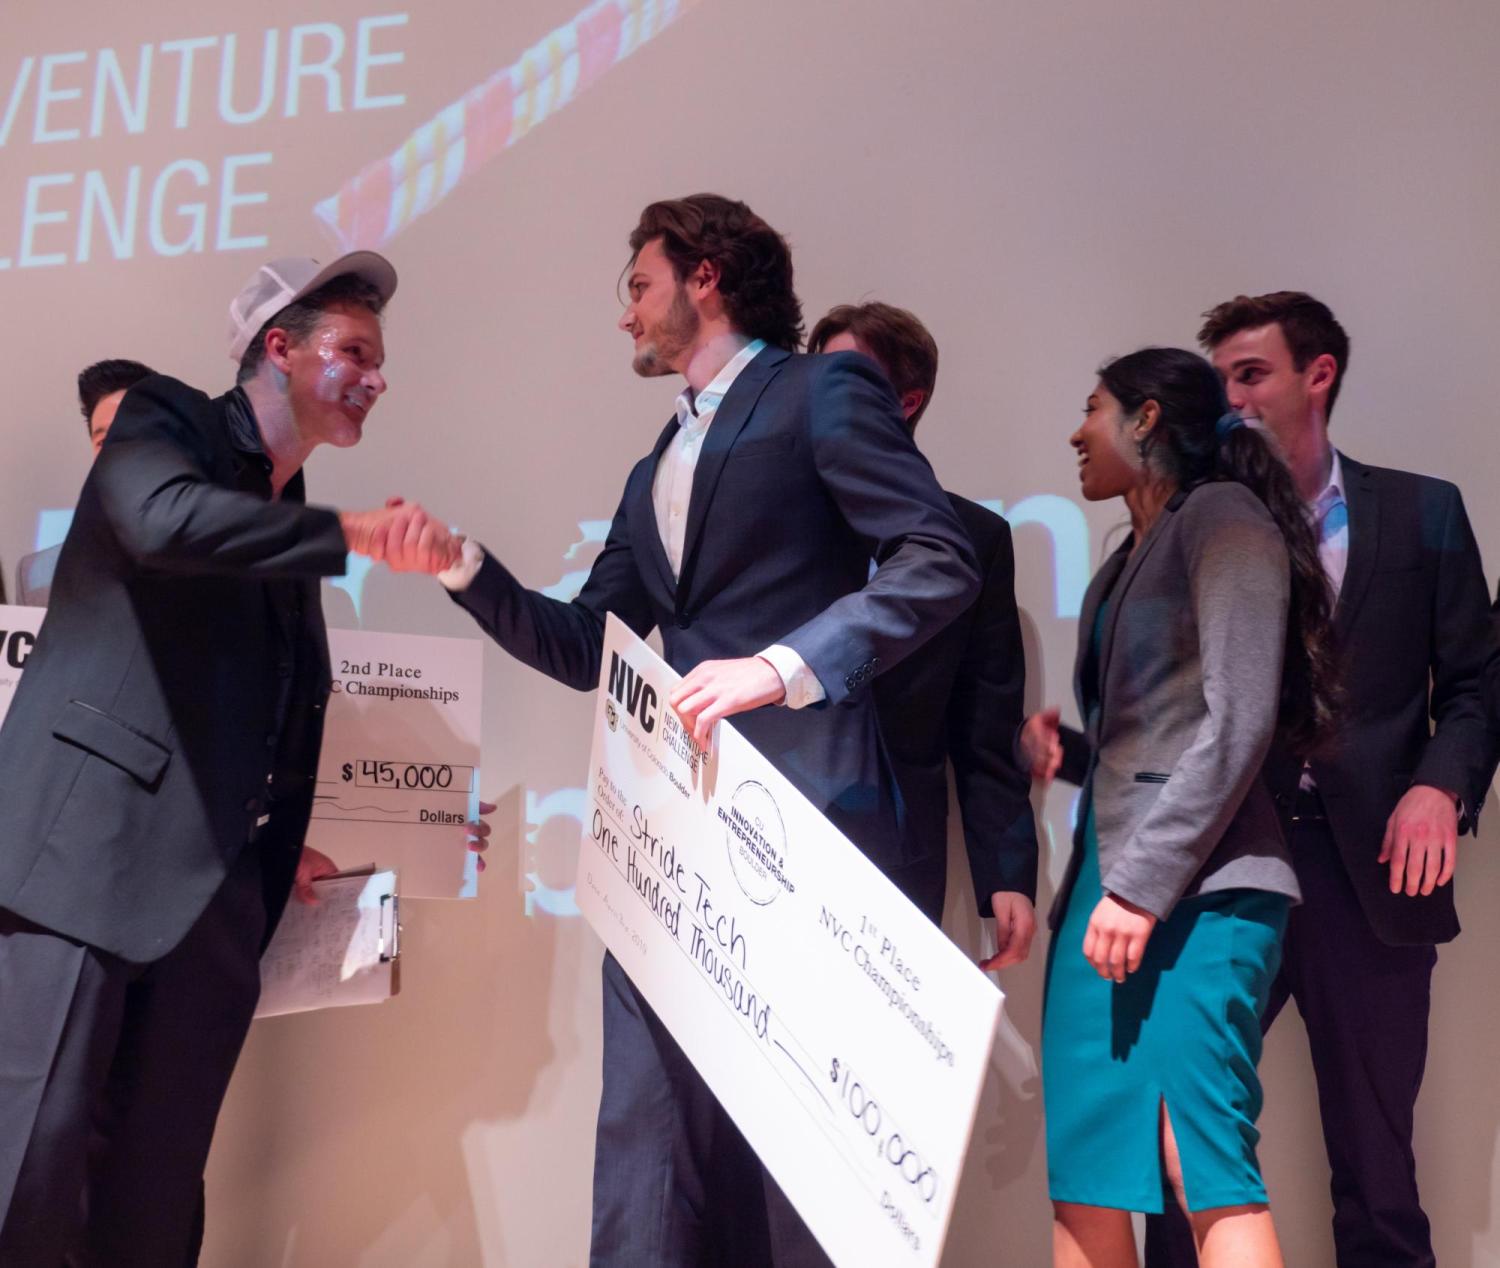 New Venture Challenge winners receive a giant check